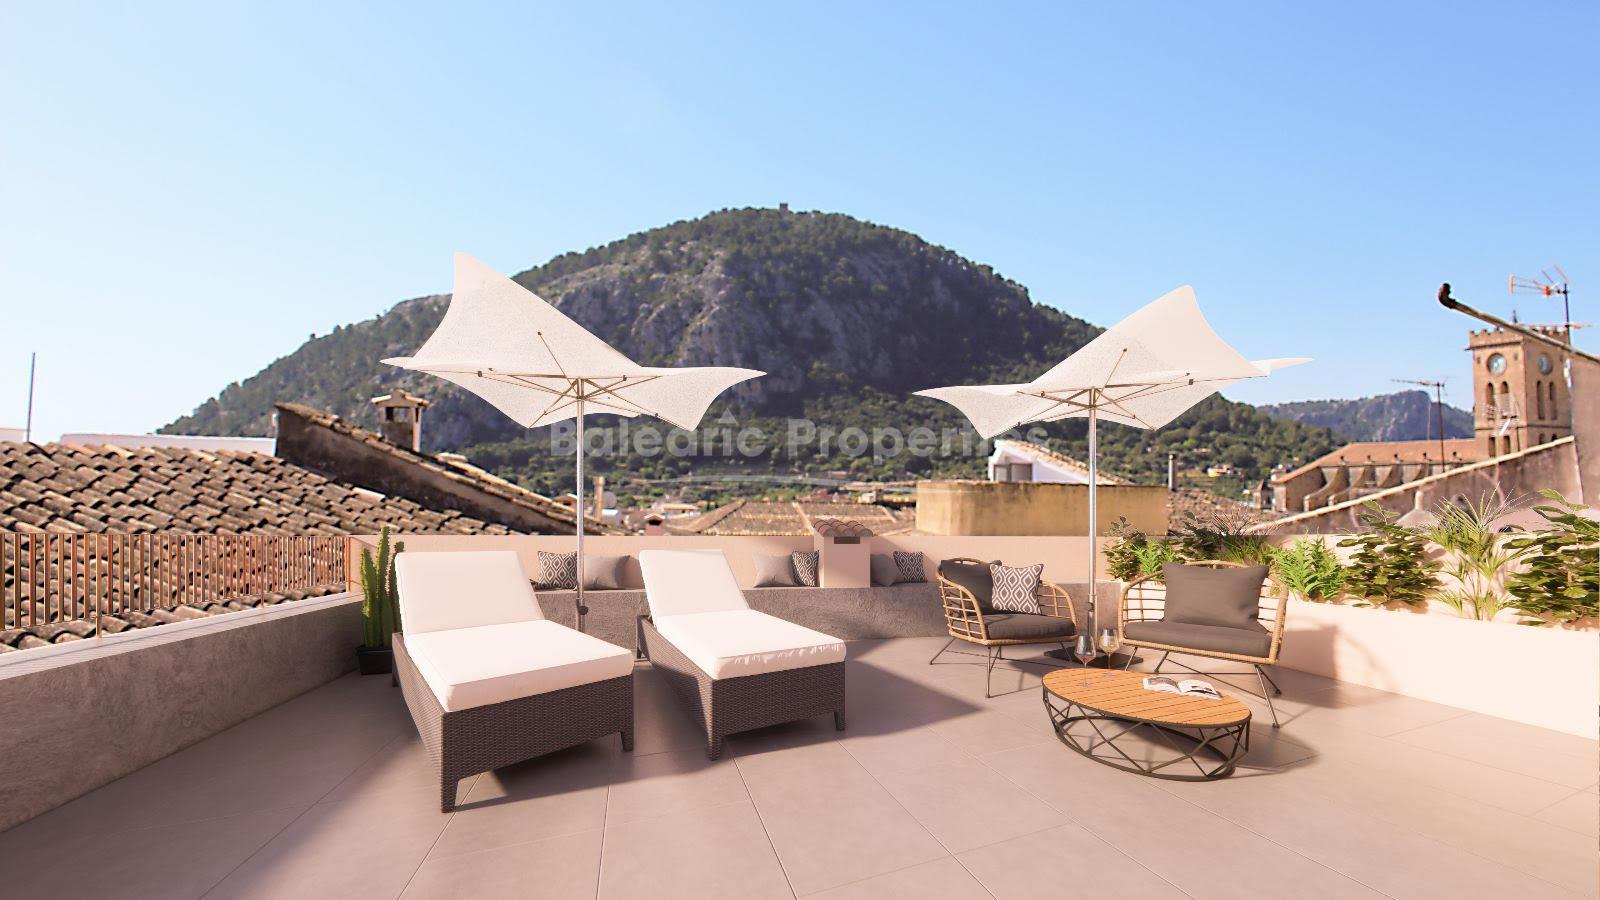 Town house project with building license for sale in Pollensa, Mallorca